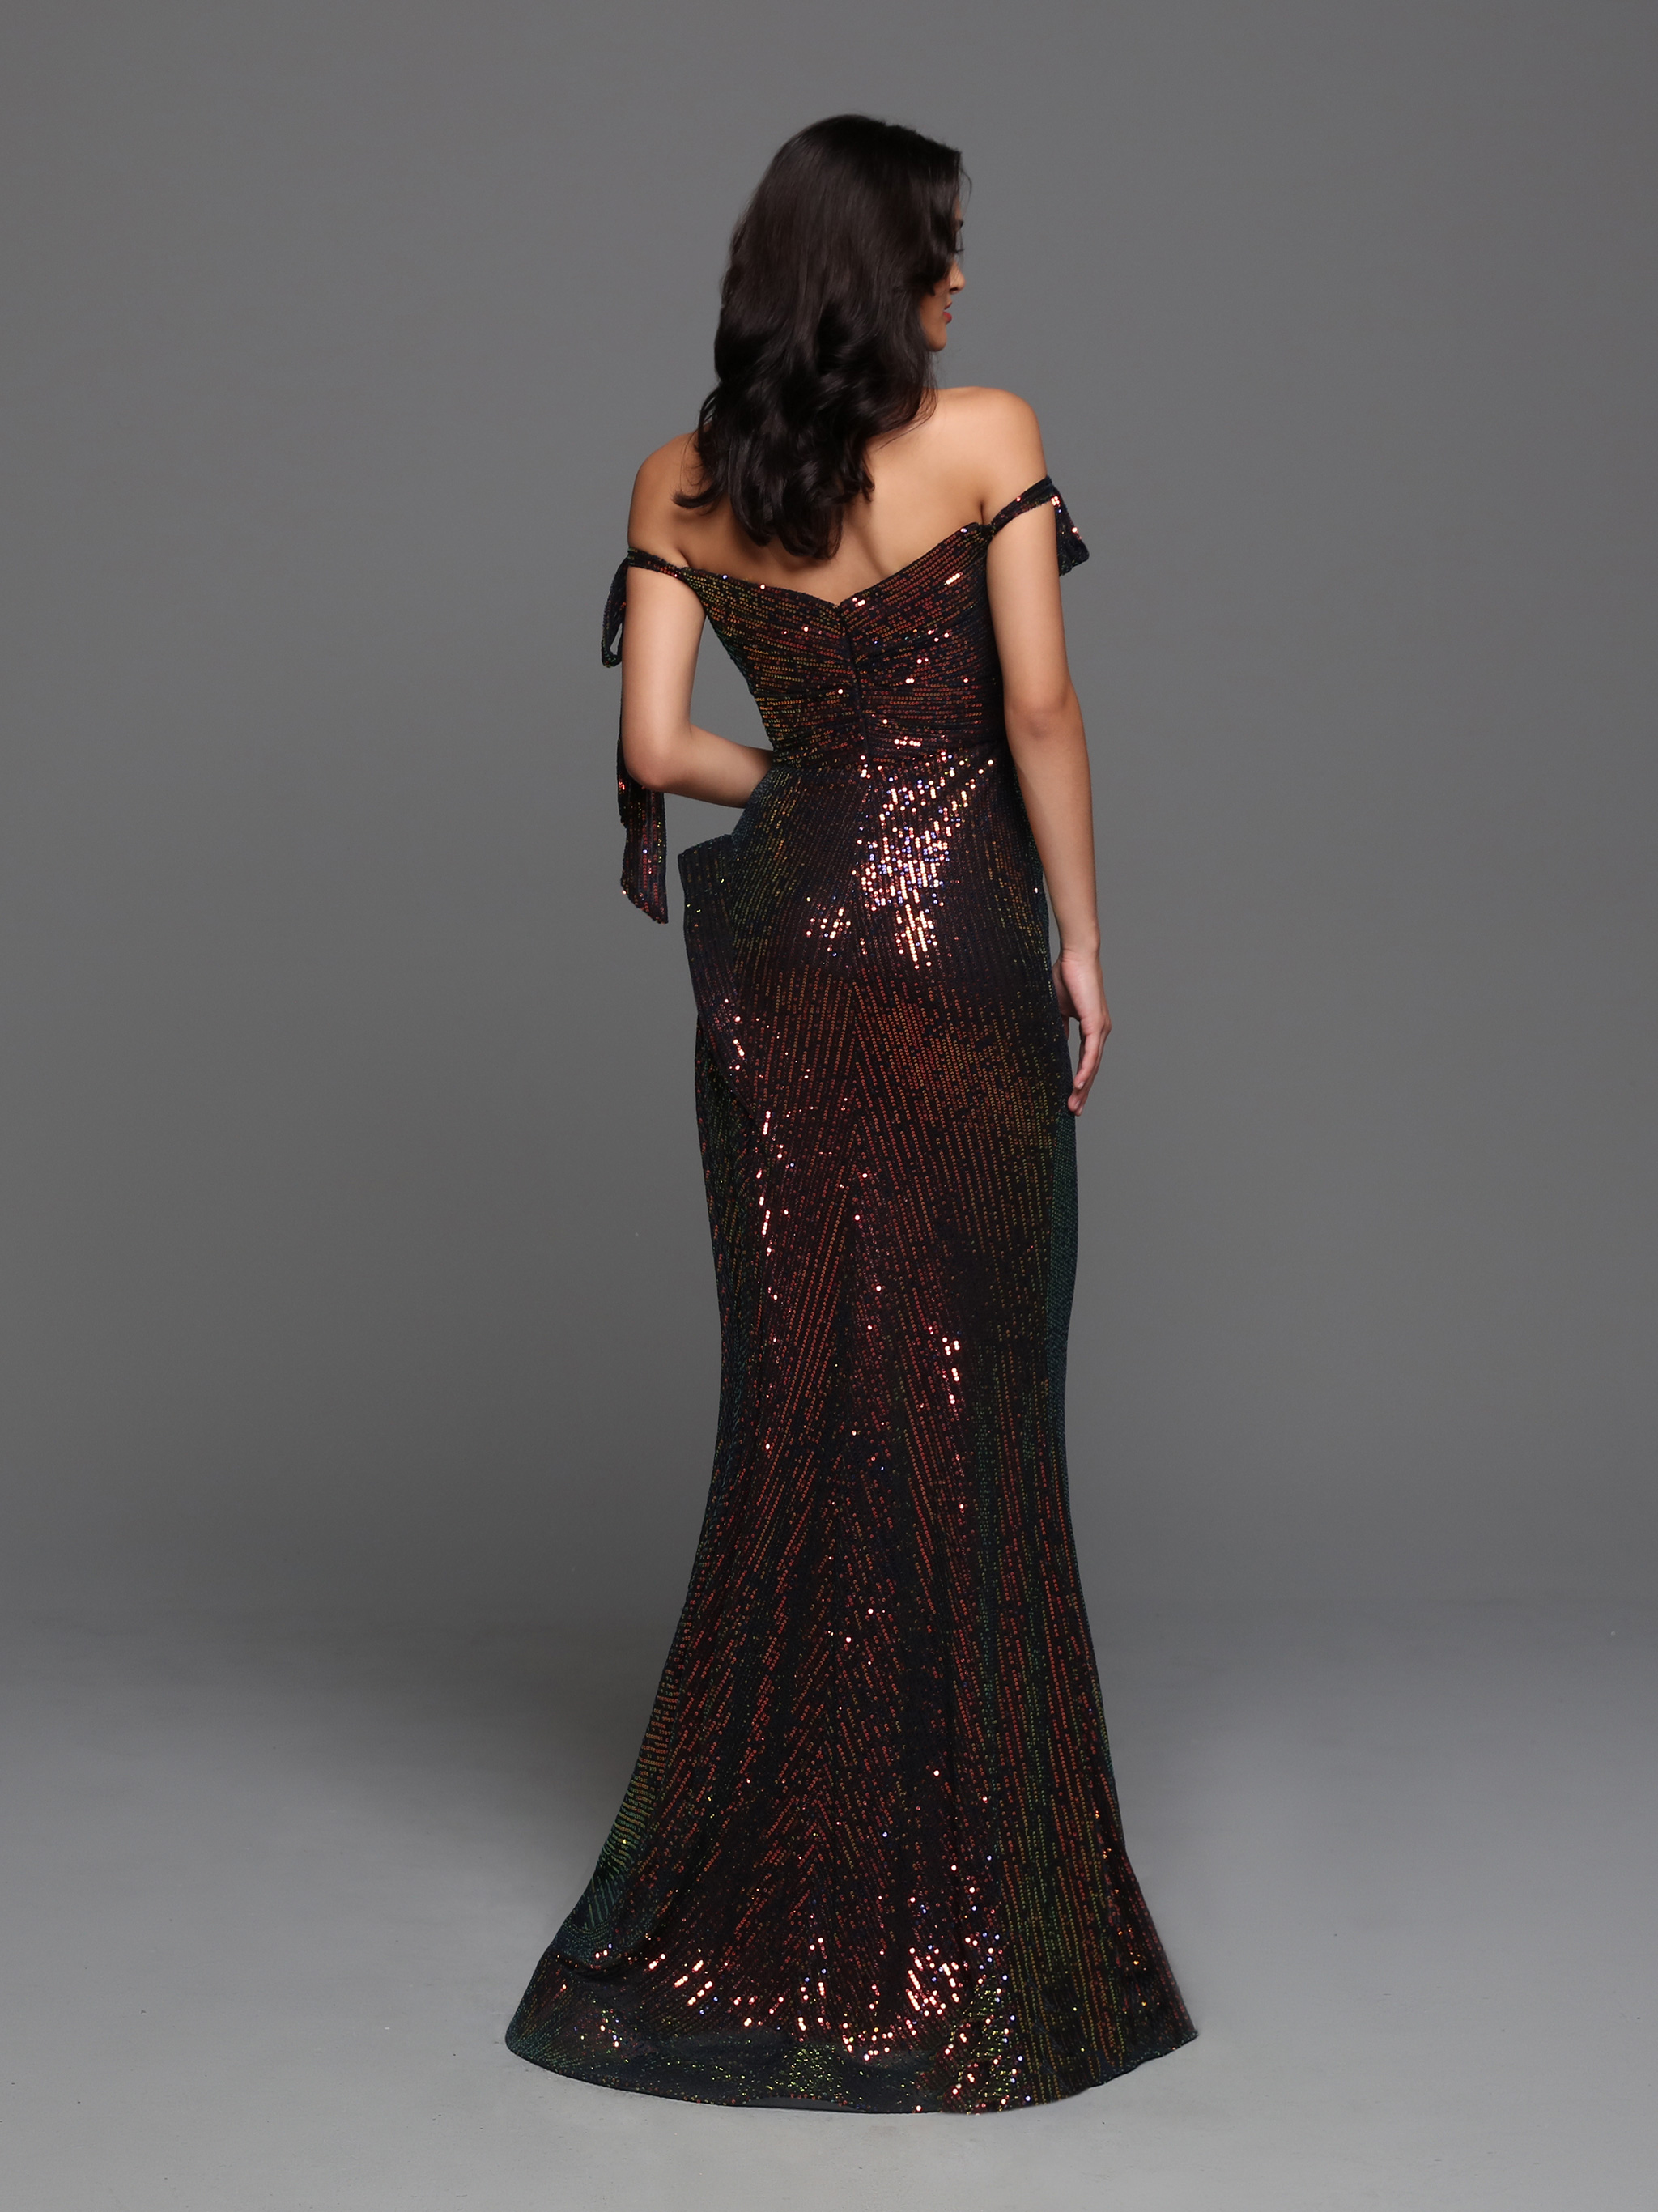 Image showing back view of style #72266